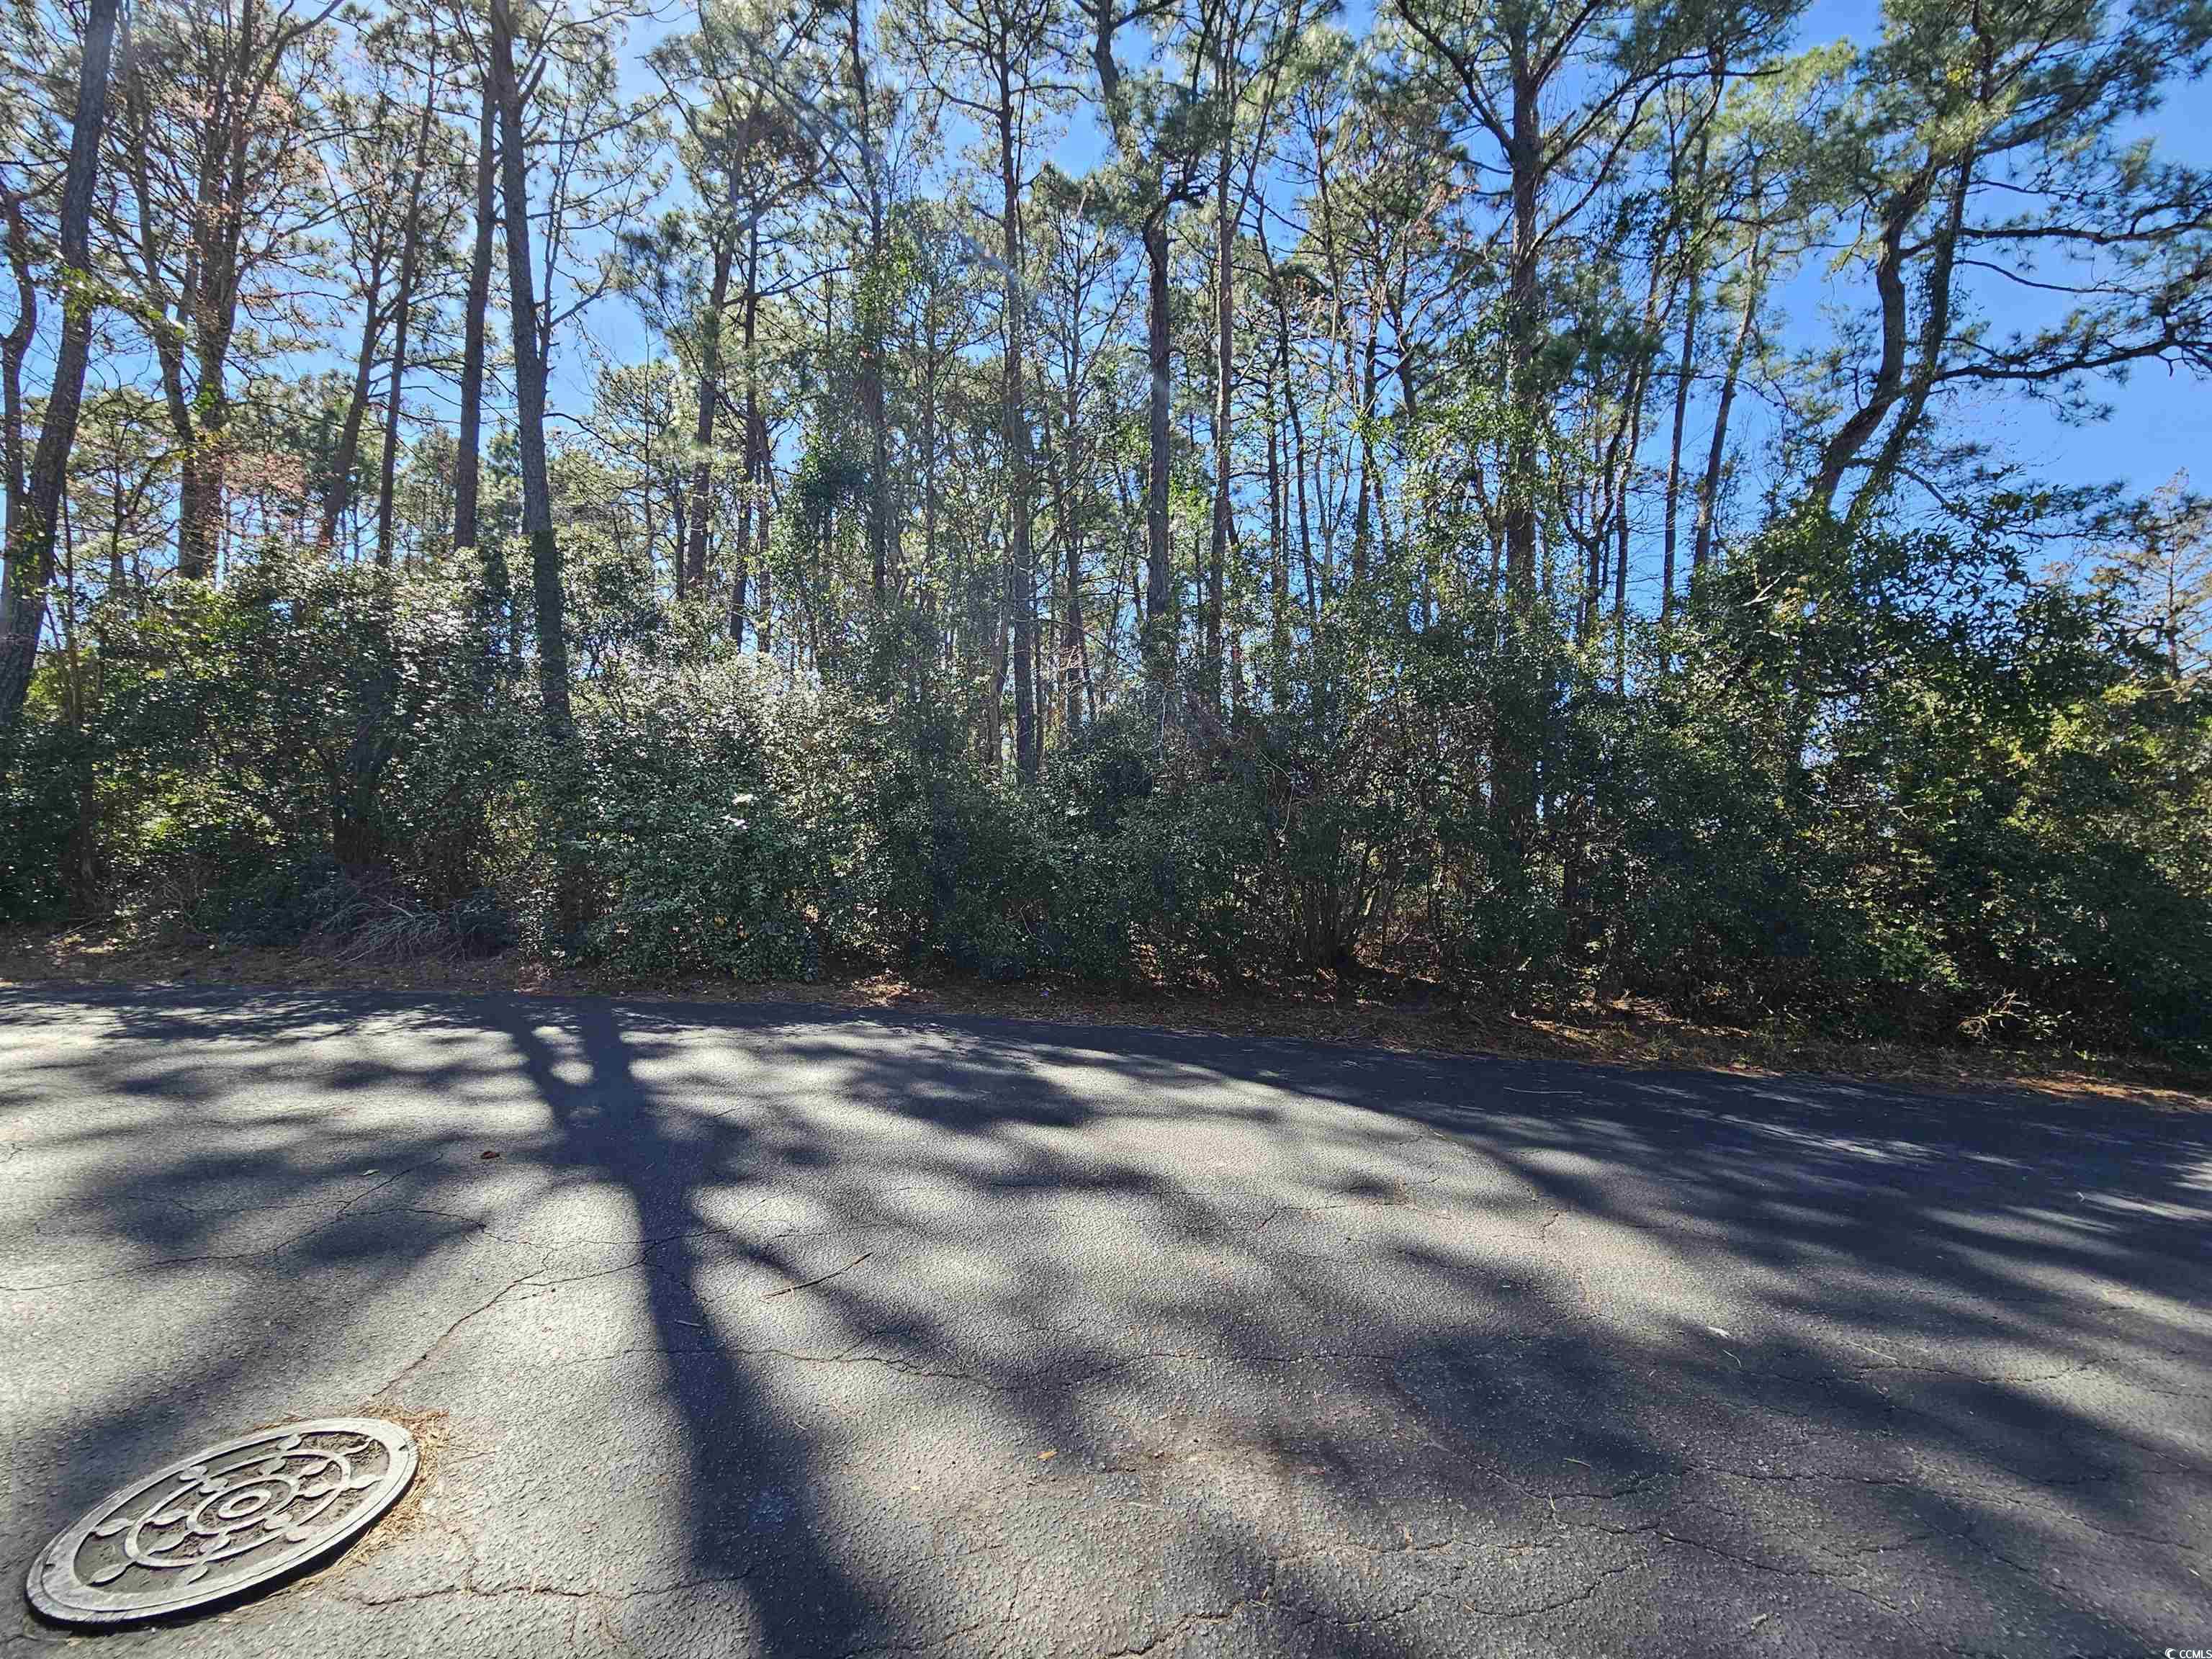 come build your dream home on this almost half acre lot in deerfield! large lot on a quiet cul de sac and a golf cart ride to the beach. loon ct is off of a dead end street so great quiet and private location.